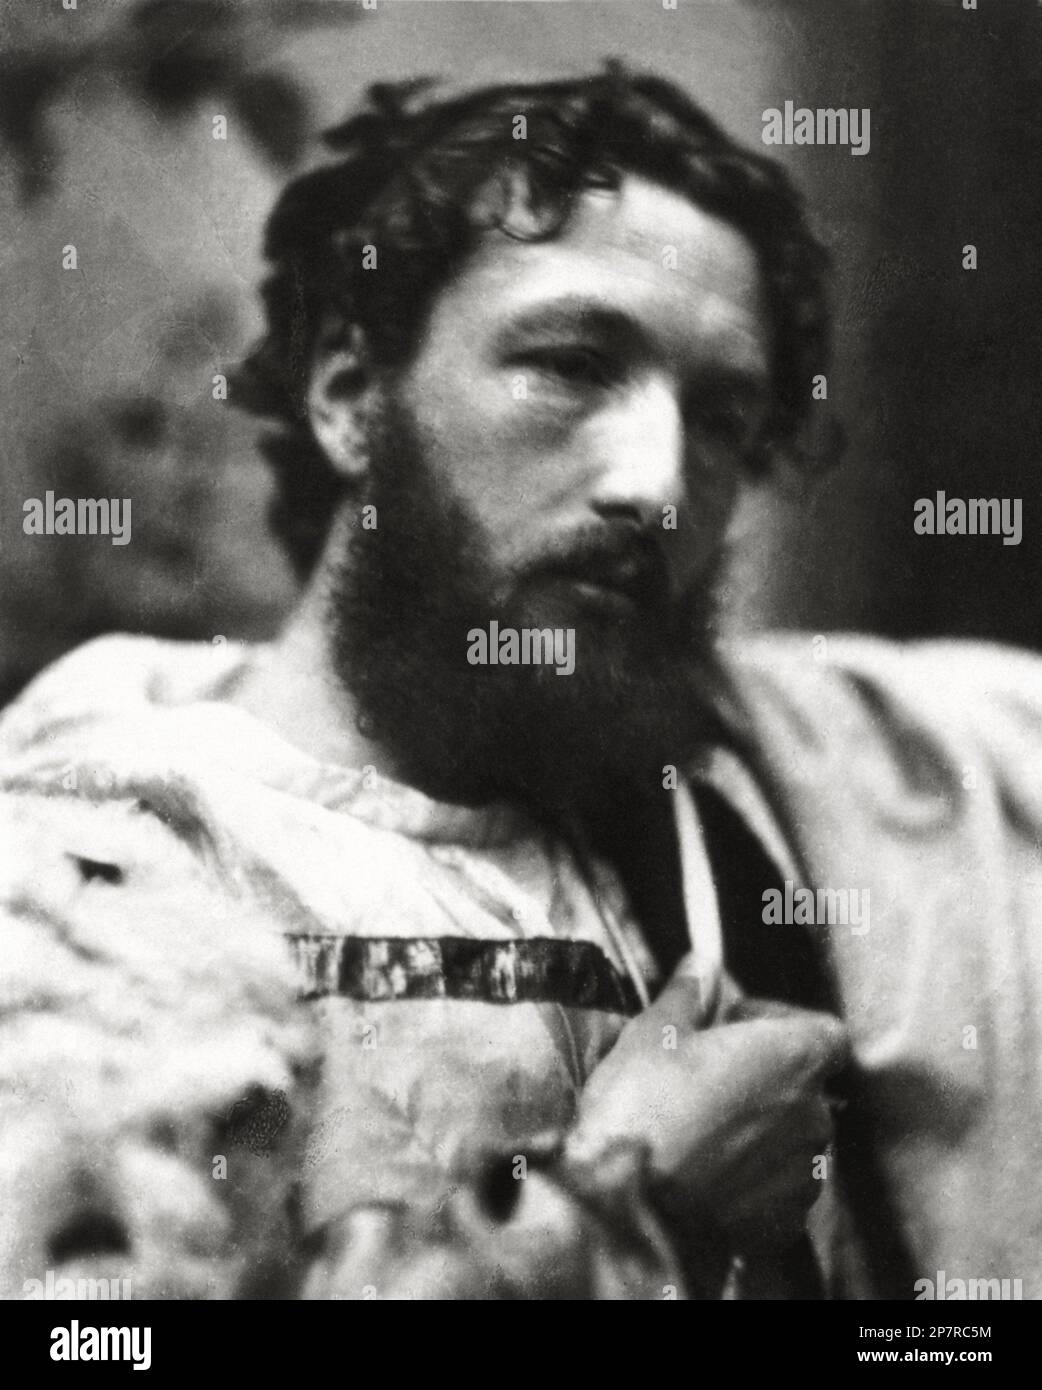 1865 ca : The celebrated british painter and sculptor  Lord Frederic LEIGHTON ( 1830 - 1896 ) , influenced by the Pre-Raphaellite movement . Photo in ancient dress by celebrated pictorialist photographer David Wilkie WYNFIELD  - PITTORE - PITTURA - ARTEI VISIVE e PLASTICHE - SCULTORE - SCULTURA - sculpture - ARTE - ART - portrait - ritratto - arts  - barba - beard  - uomo  - GAY - omosessuale - omosessualità - LGBT -  - homosexual - homosexuality  ----  Archivio GBB Stock Photo